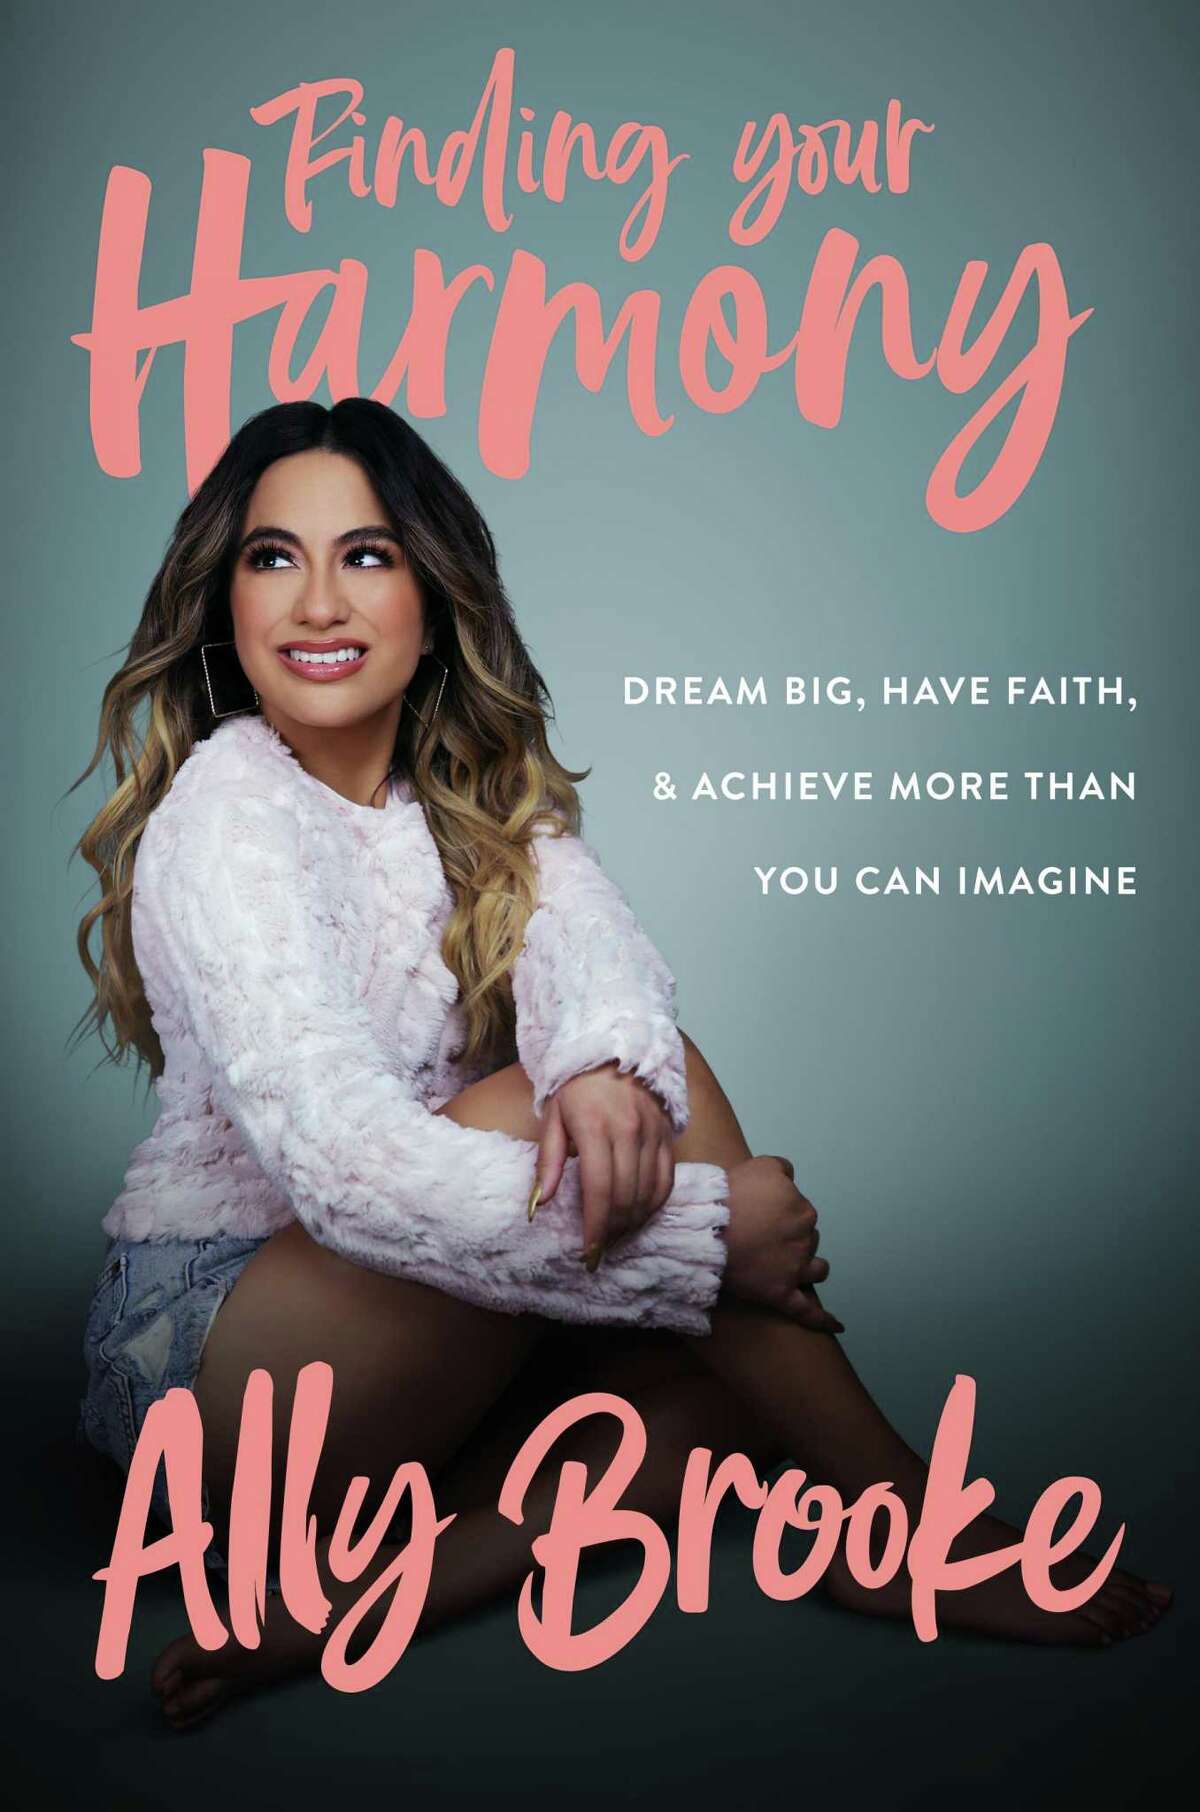 Ally Brooke, who is from San Antonio, has published a new memoir, "Finding Your Harmony: Dream Big, Have Faith and Achieve More Than You Can Imagine."